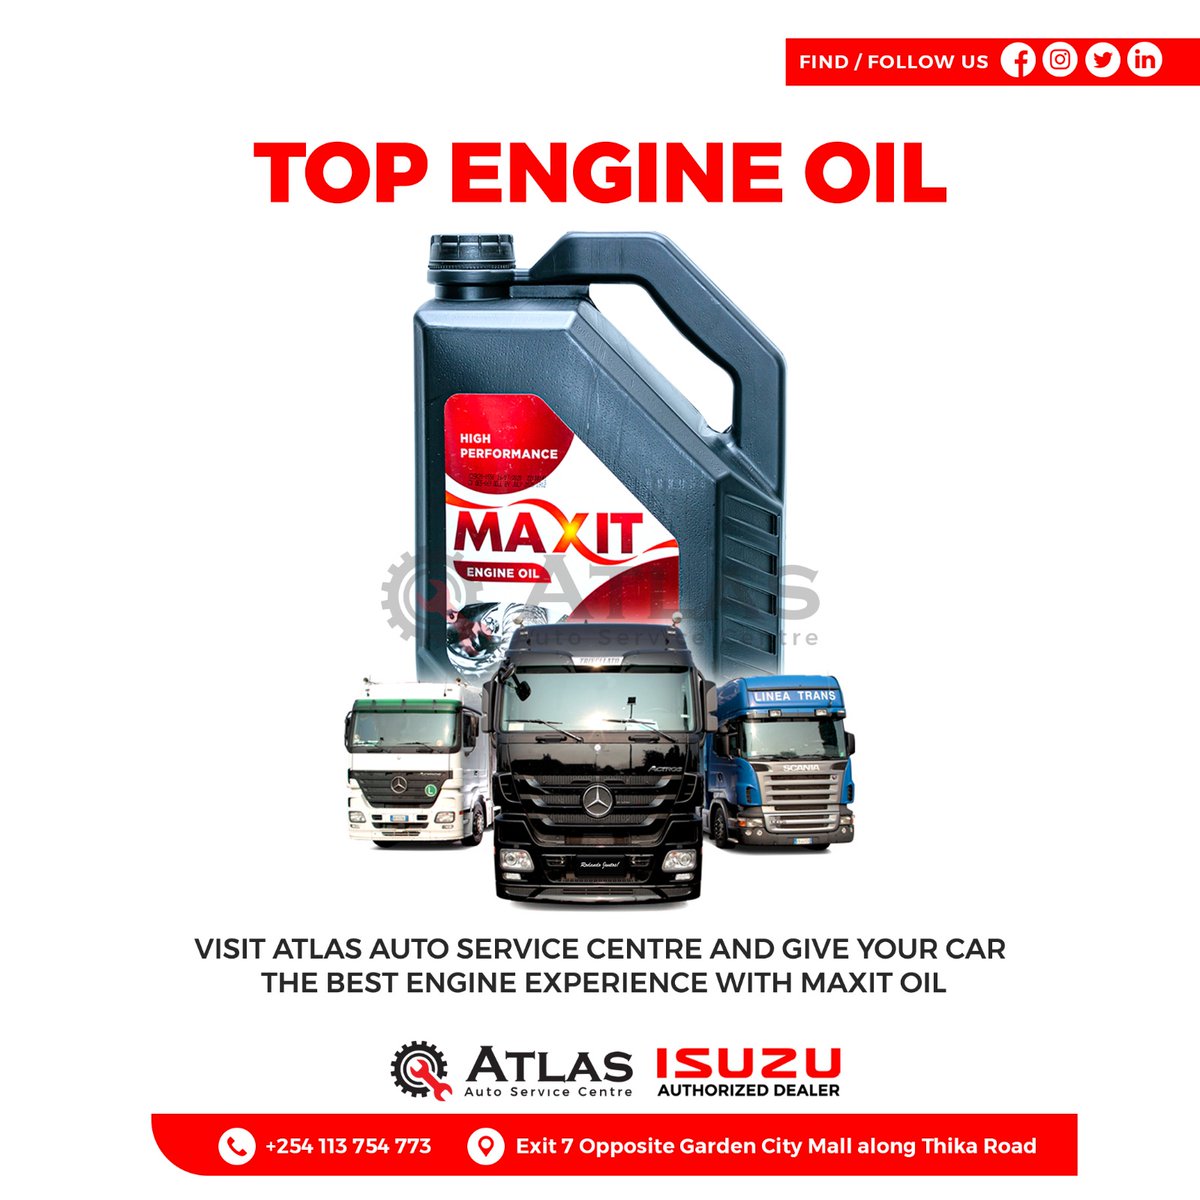 Experience peak performance with the top engine oil choice! 🚗⚙️Visit @Atlasautocentre and treat your car to the ultimate engine care with Maxit Oil. Smooth rides await!#howcanwehelp #garage #isuzu #MaxitOil #EngineCare #SomeoneTellNakhumicha  #DoctorsStrikeKE #JKIA